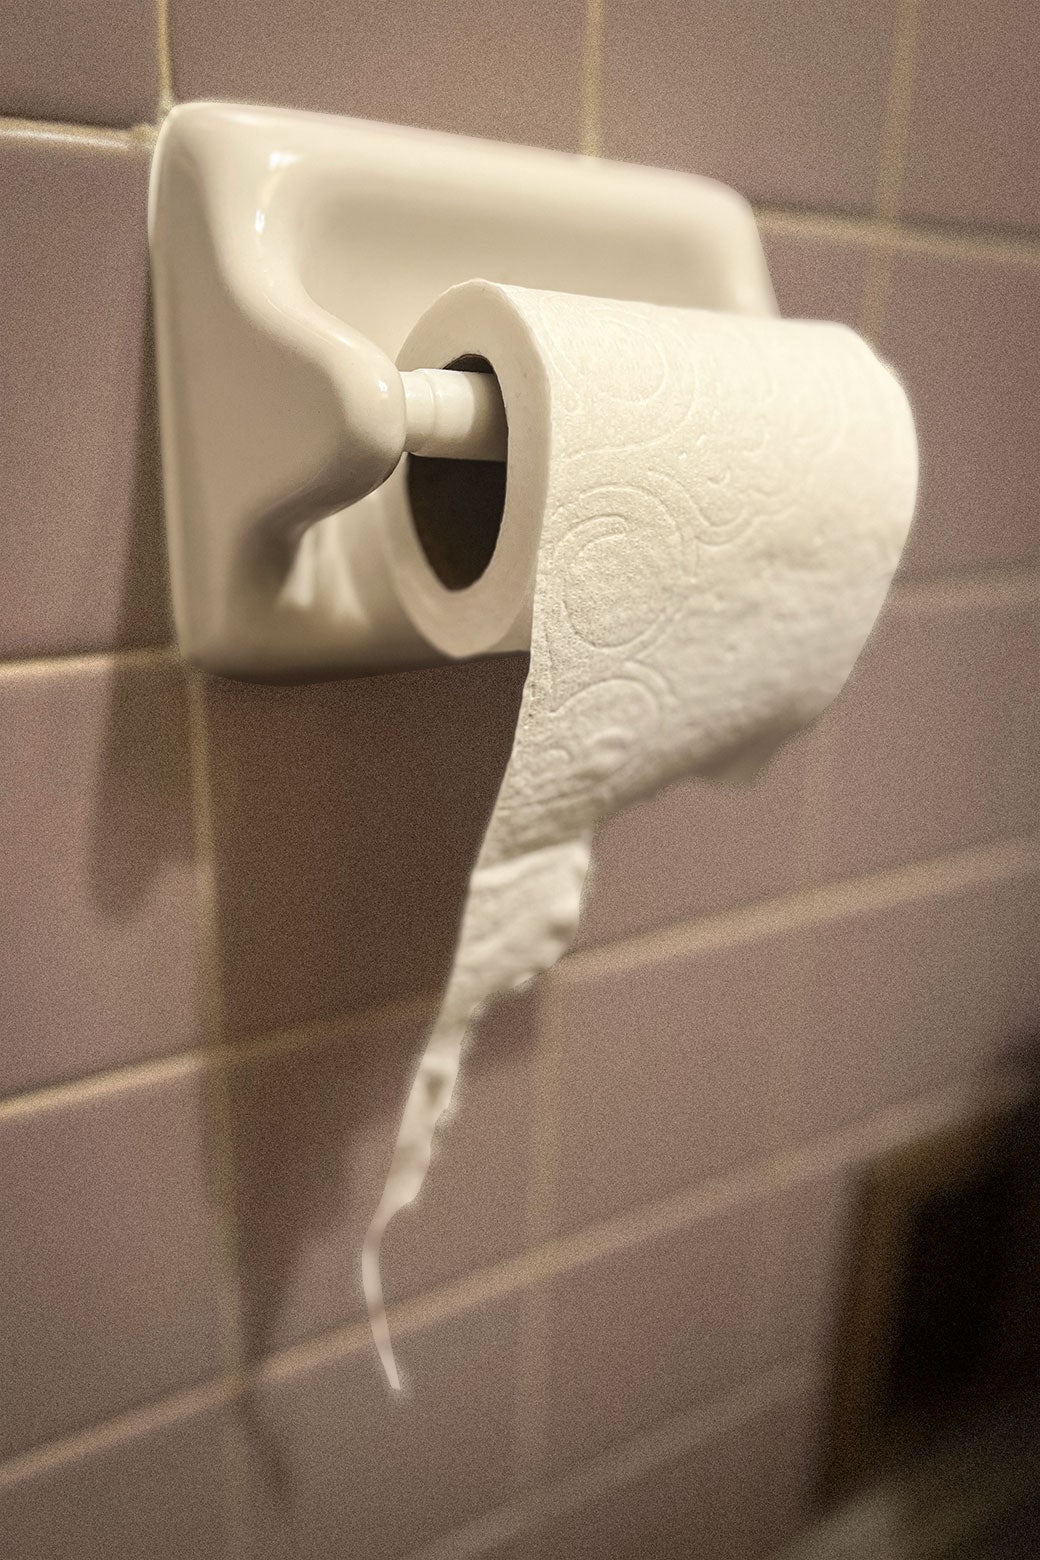 7 Types of Toilet Paper: Which is Best?